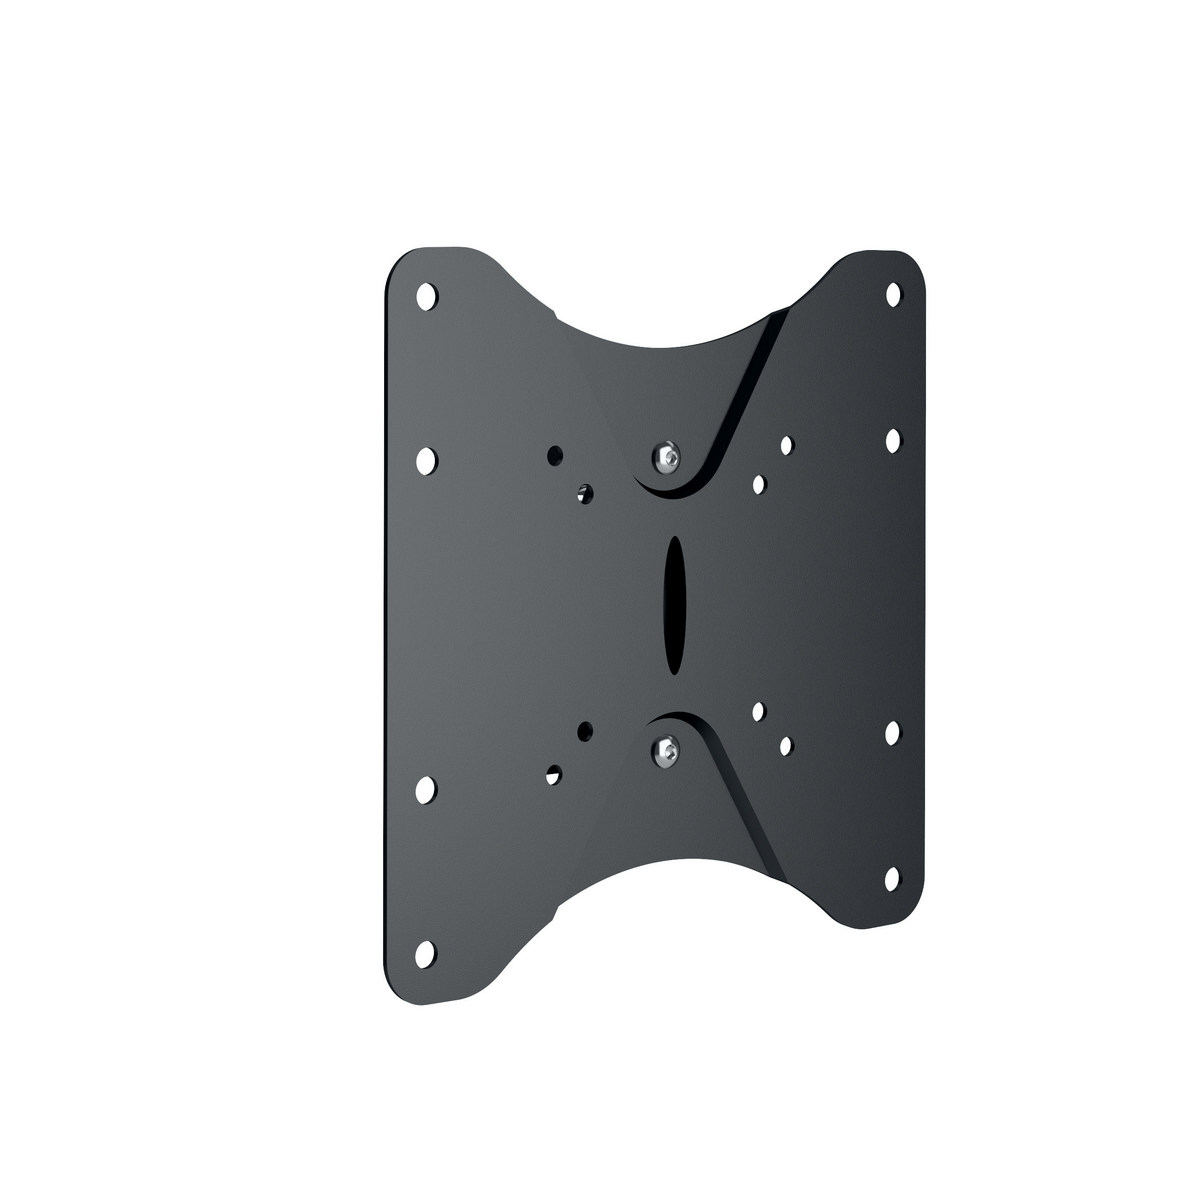 Corliving Mlm-101-t Tilting Flat Panel Wall Mount For 23" - 42" Tvs